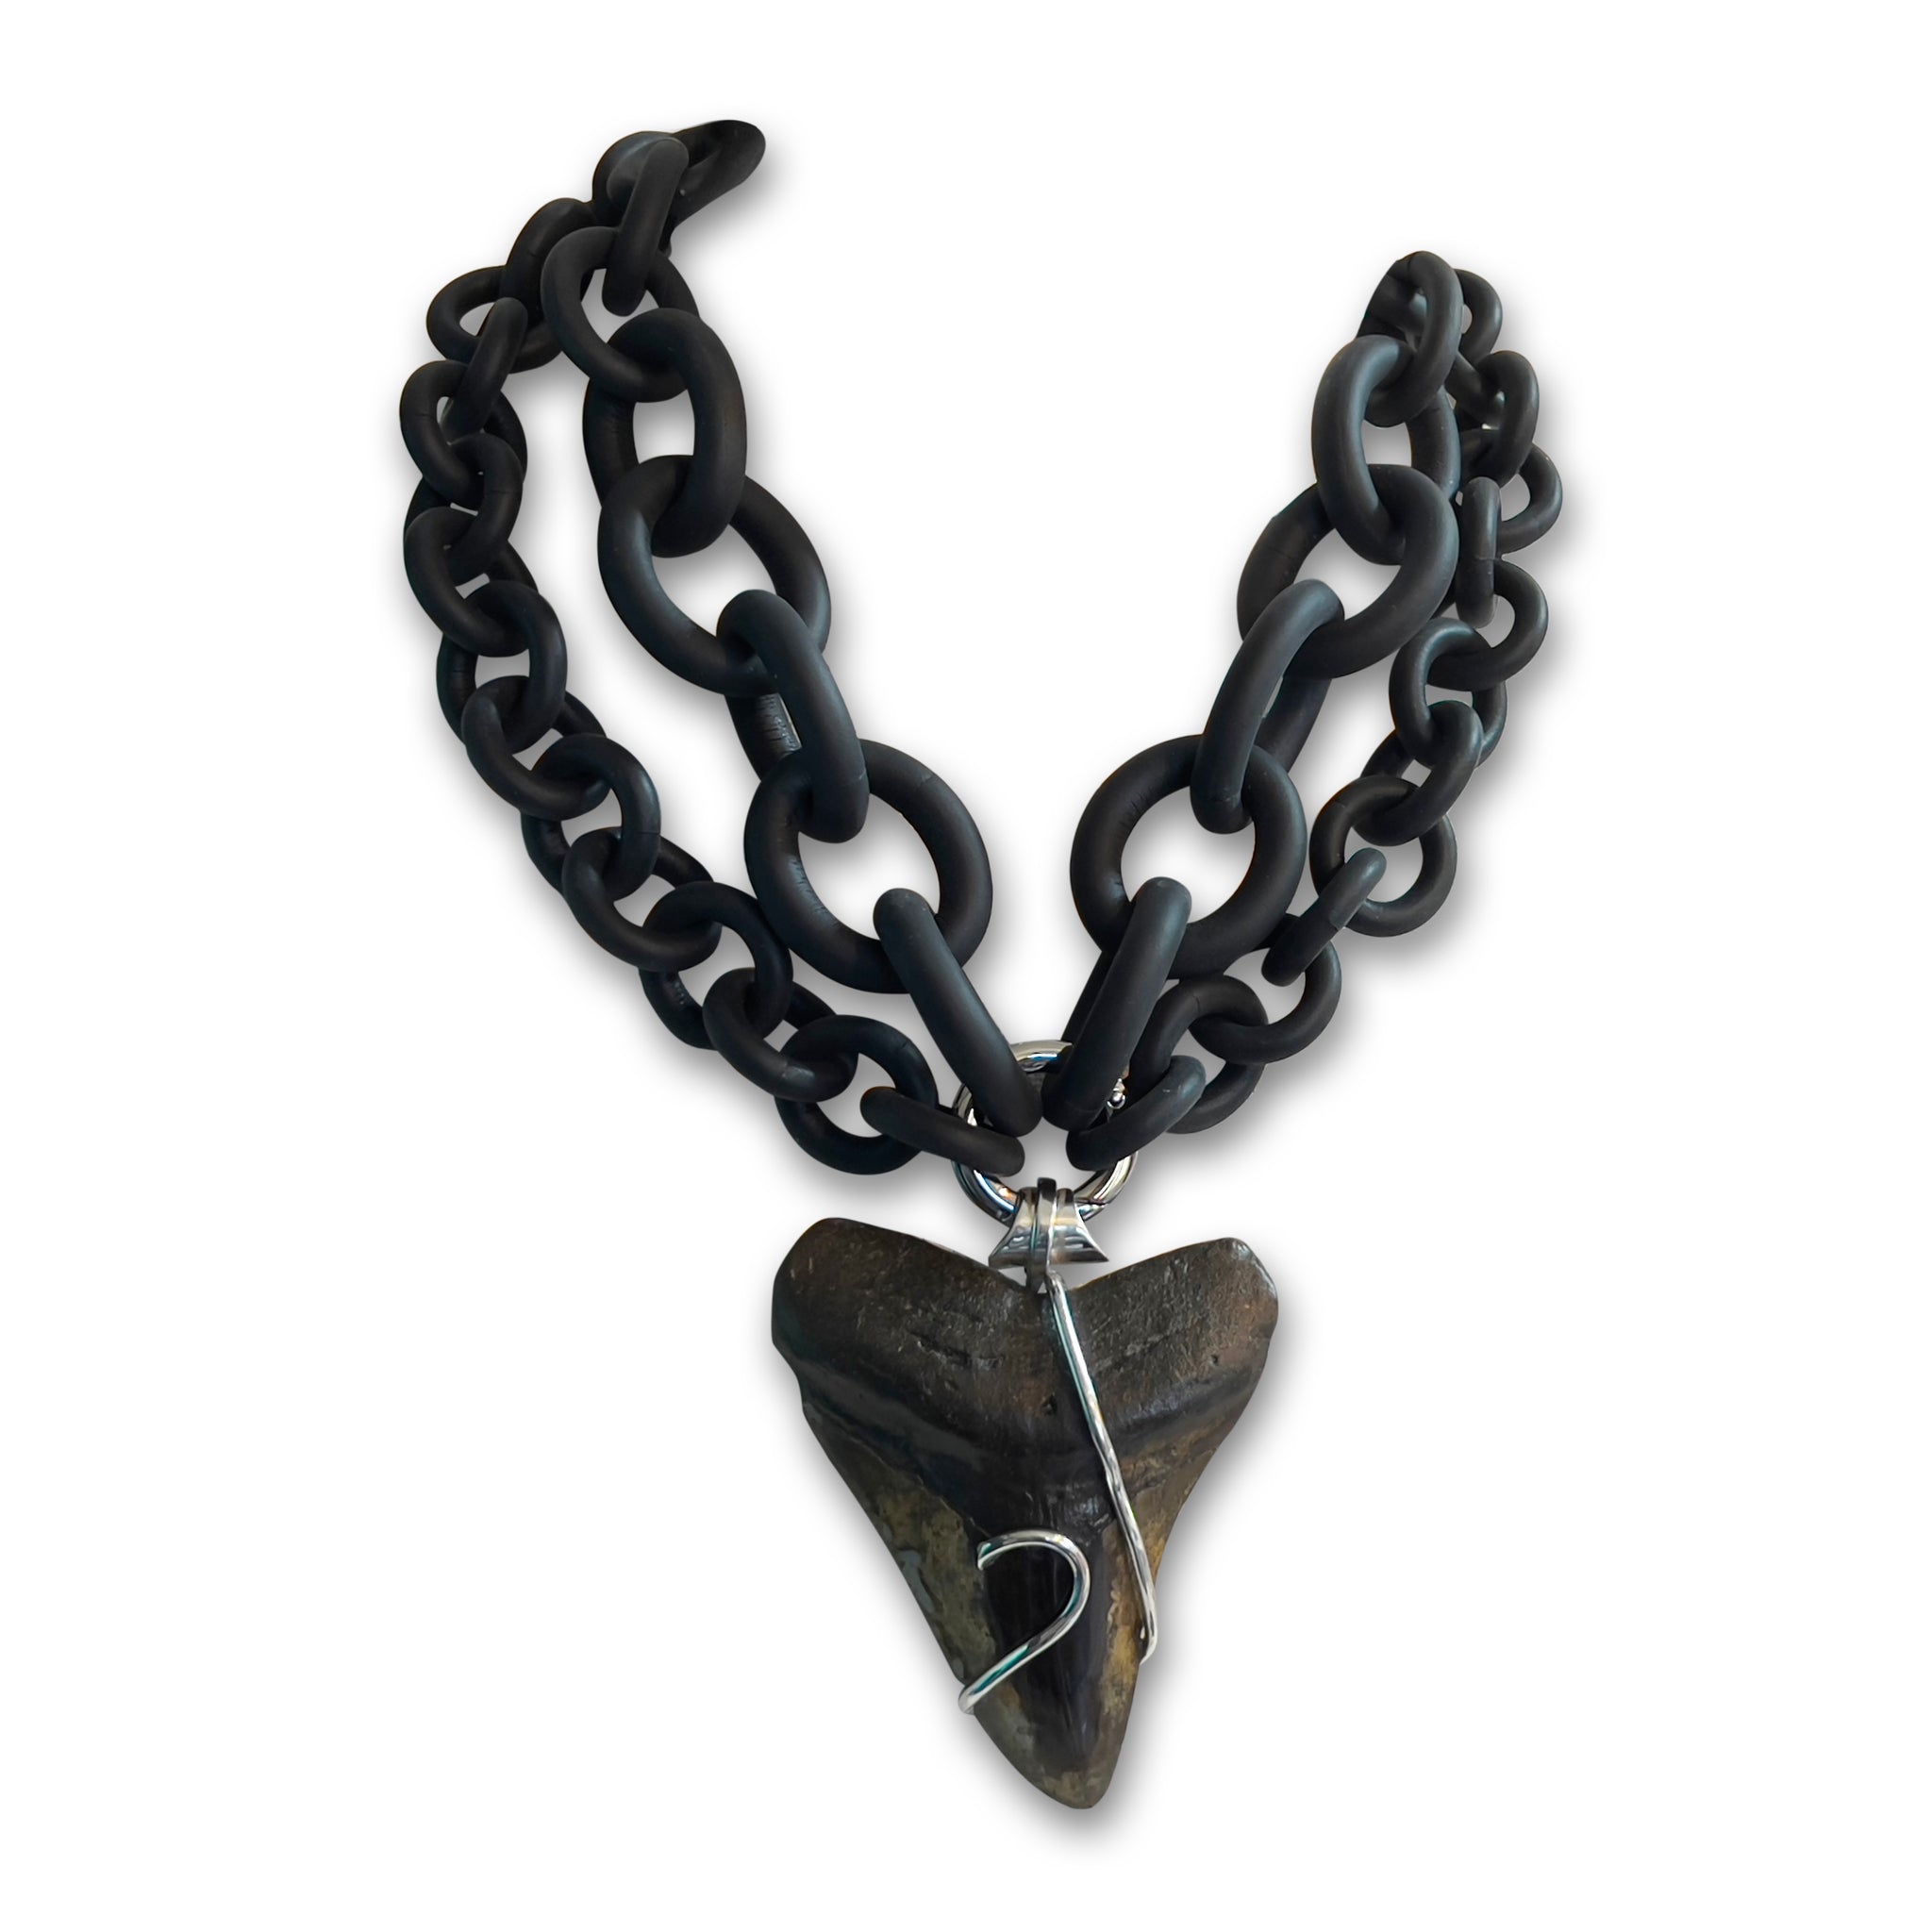 Megalodon Tooth 5-in-1 Rubber Necklace